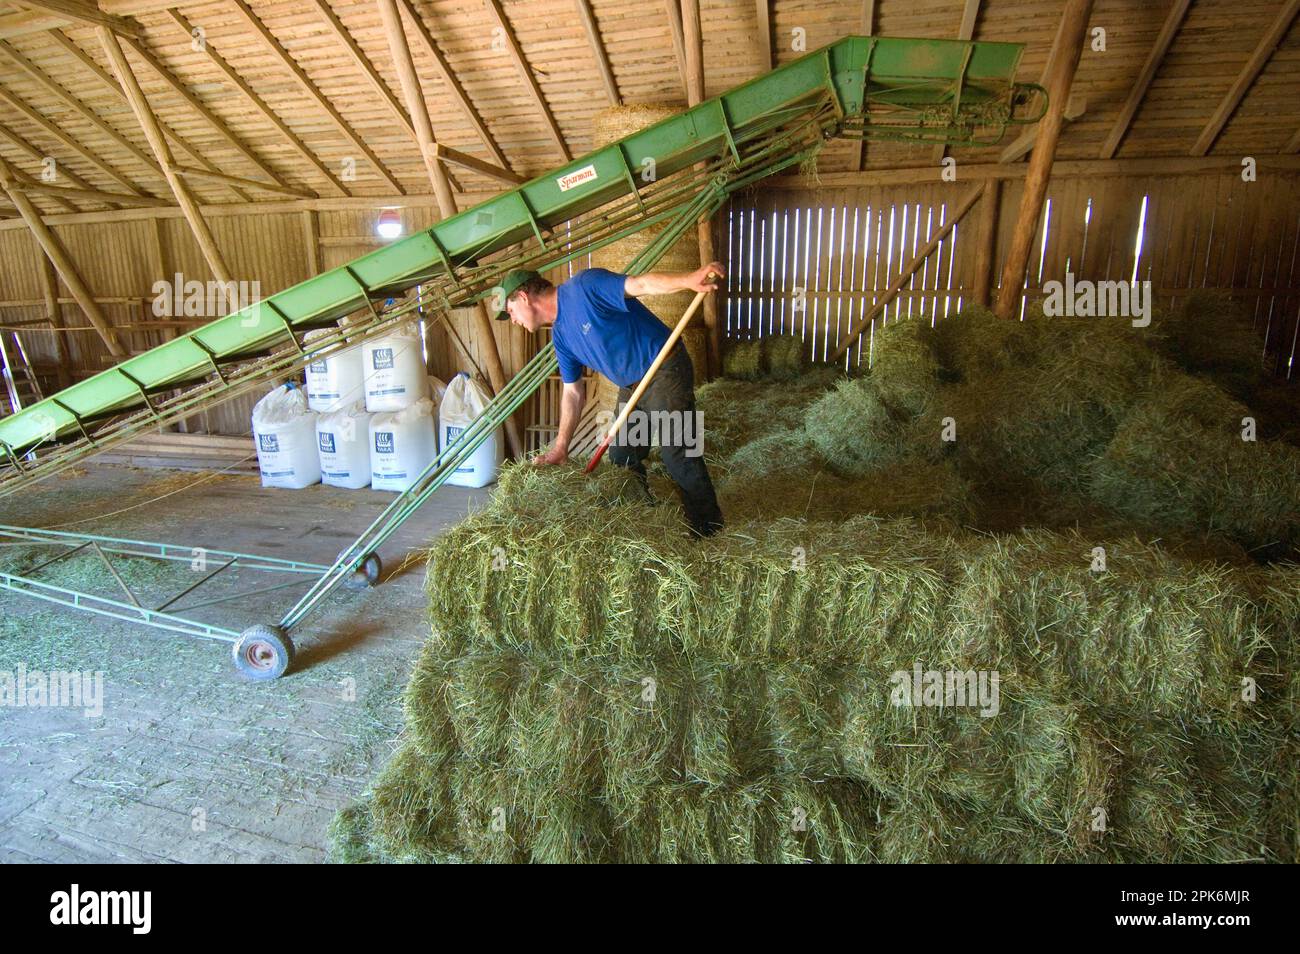 Farmer stacking small bales next to the lift in the barn, Sweden Stock Photo